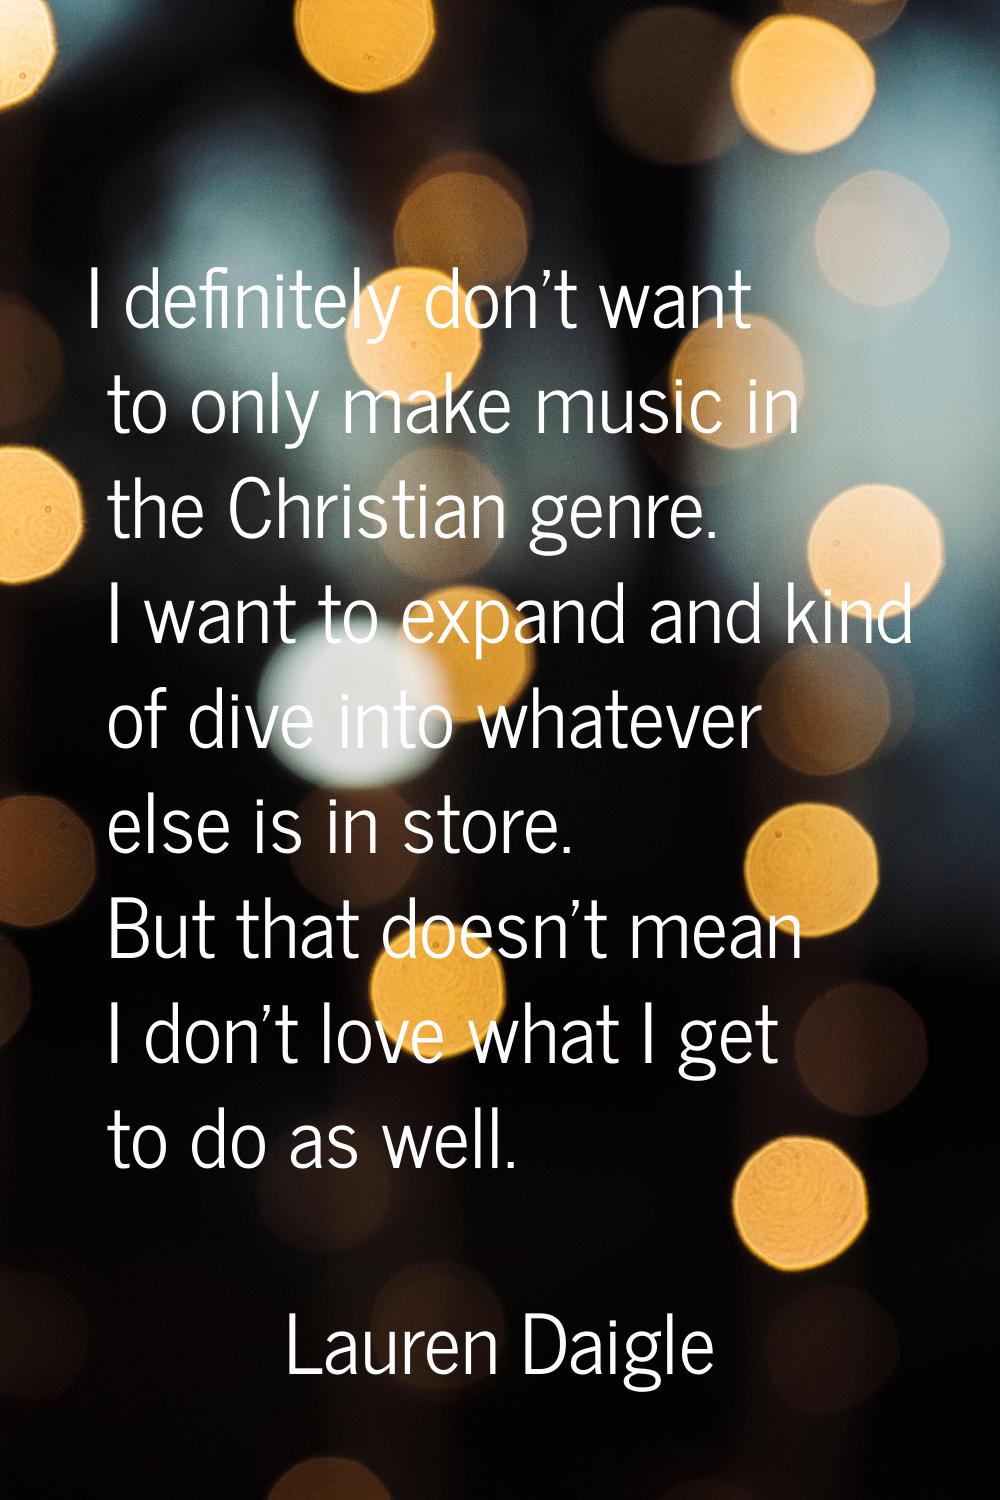 I definitely don't want to only make music in the Christian genre. I want to expand and kind of div